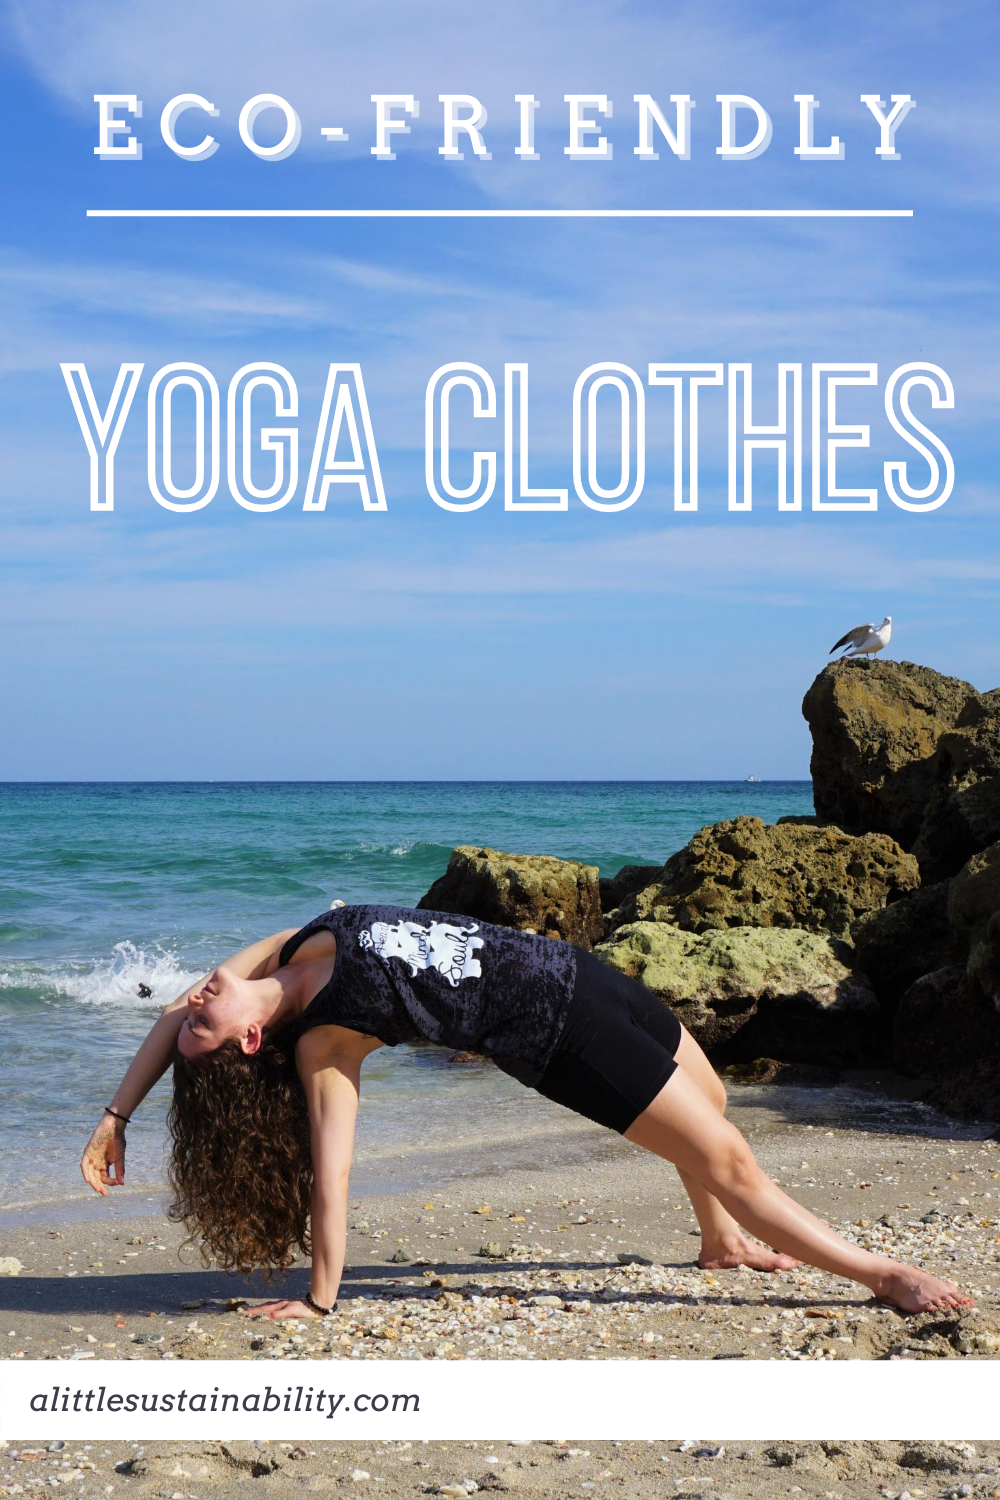 Why Choose Ethical And Sustainable Yoga Clothes - Green Apple Active